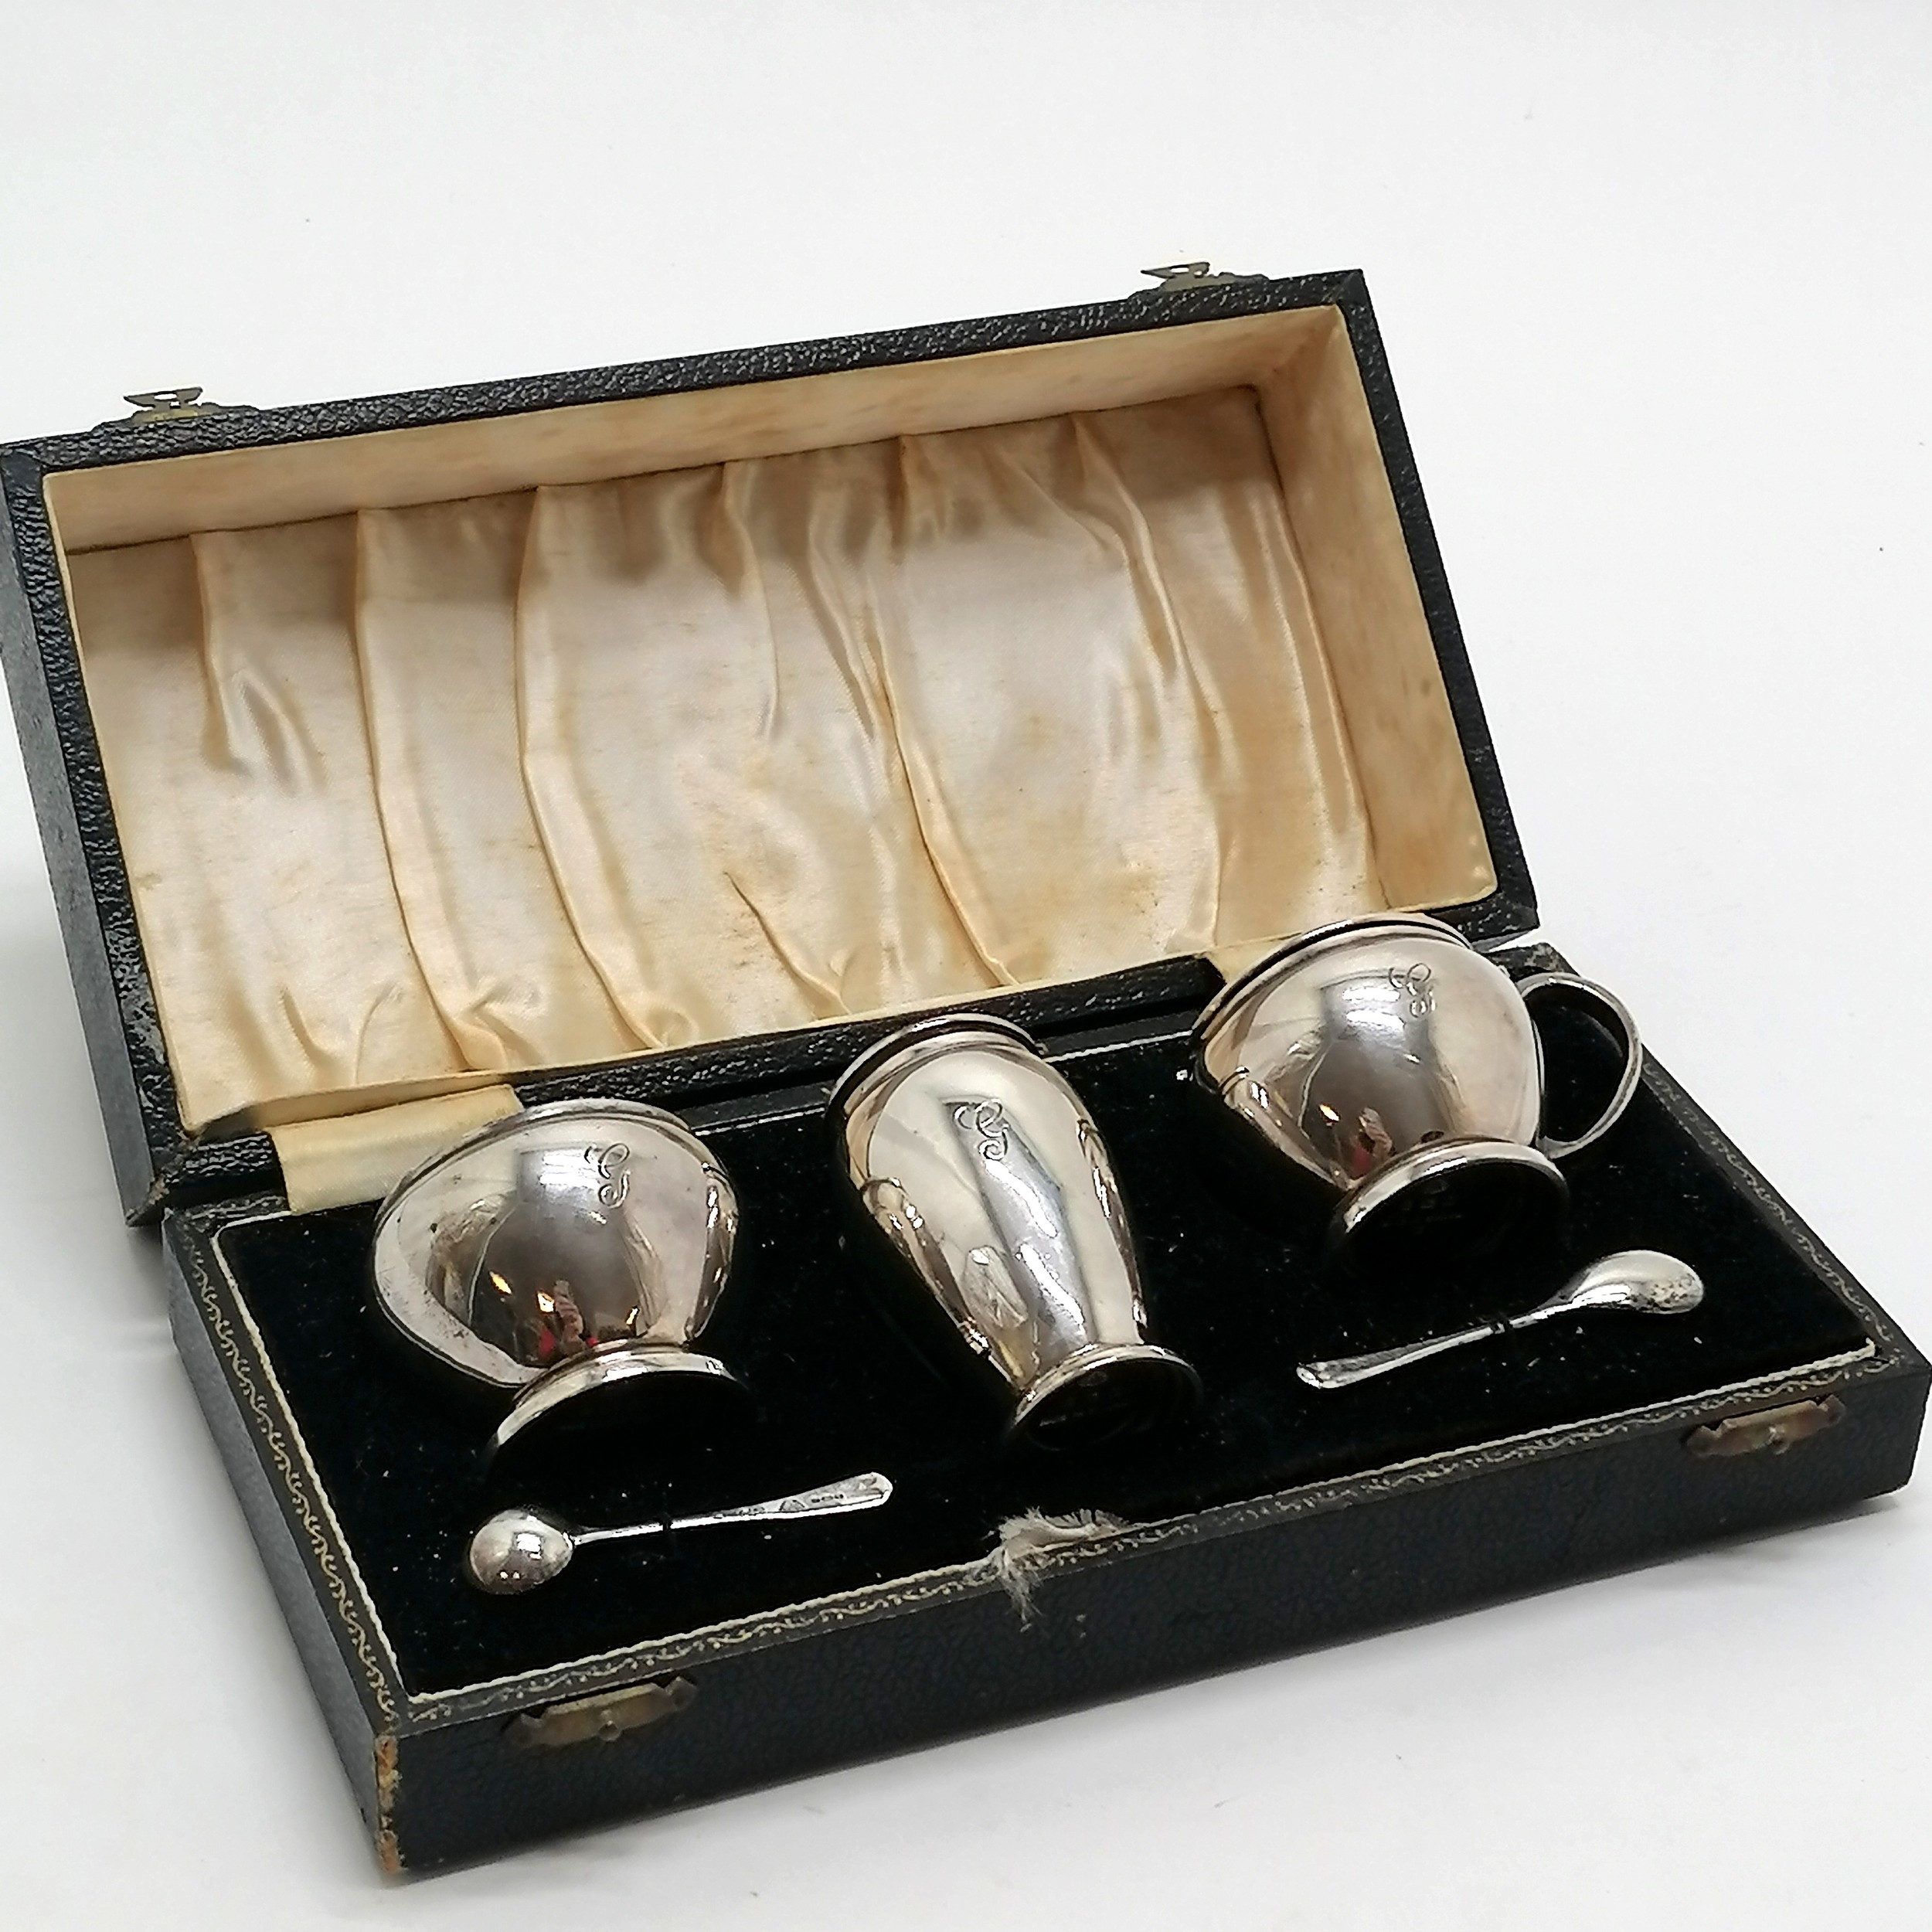 1948 cased sterling silver cruet set (with blue glass liners) by Adie Brothers Ltd - pepper 7.5cm